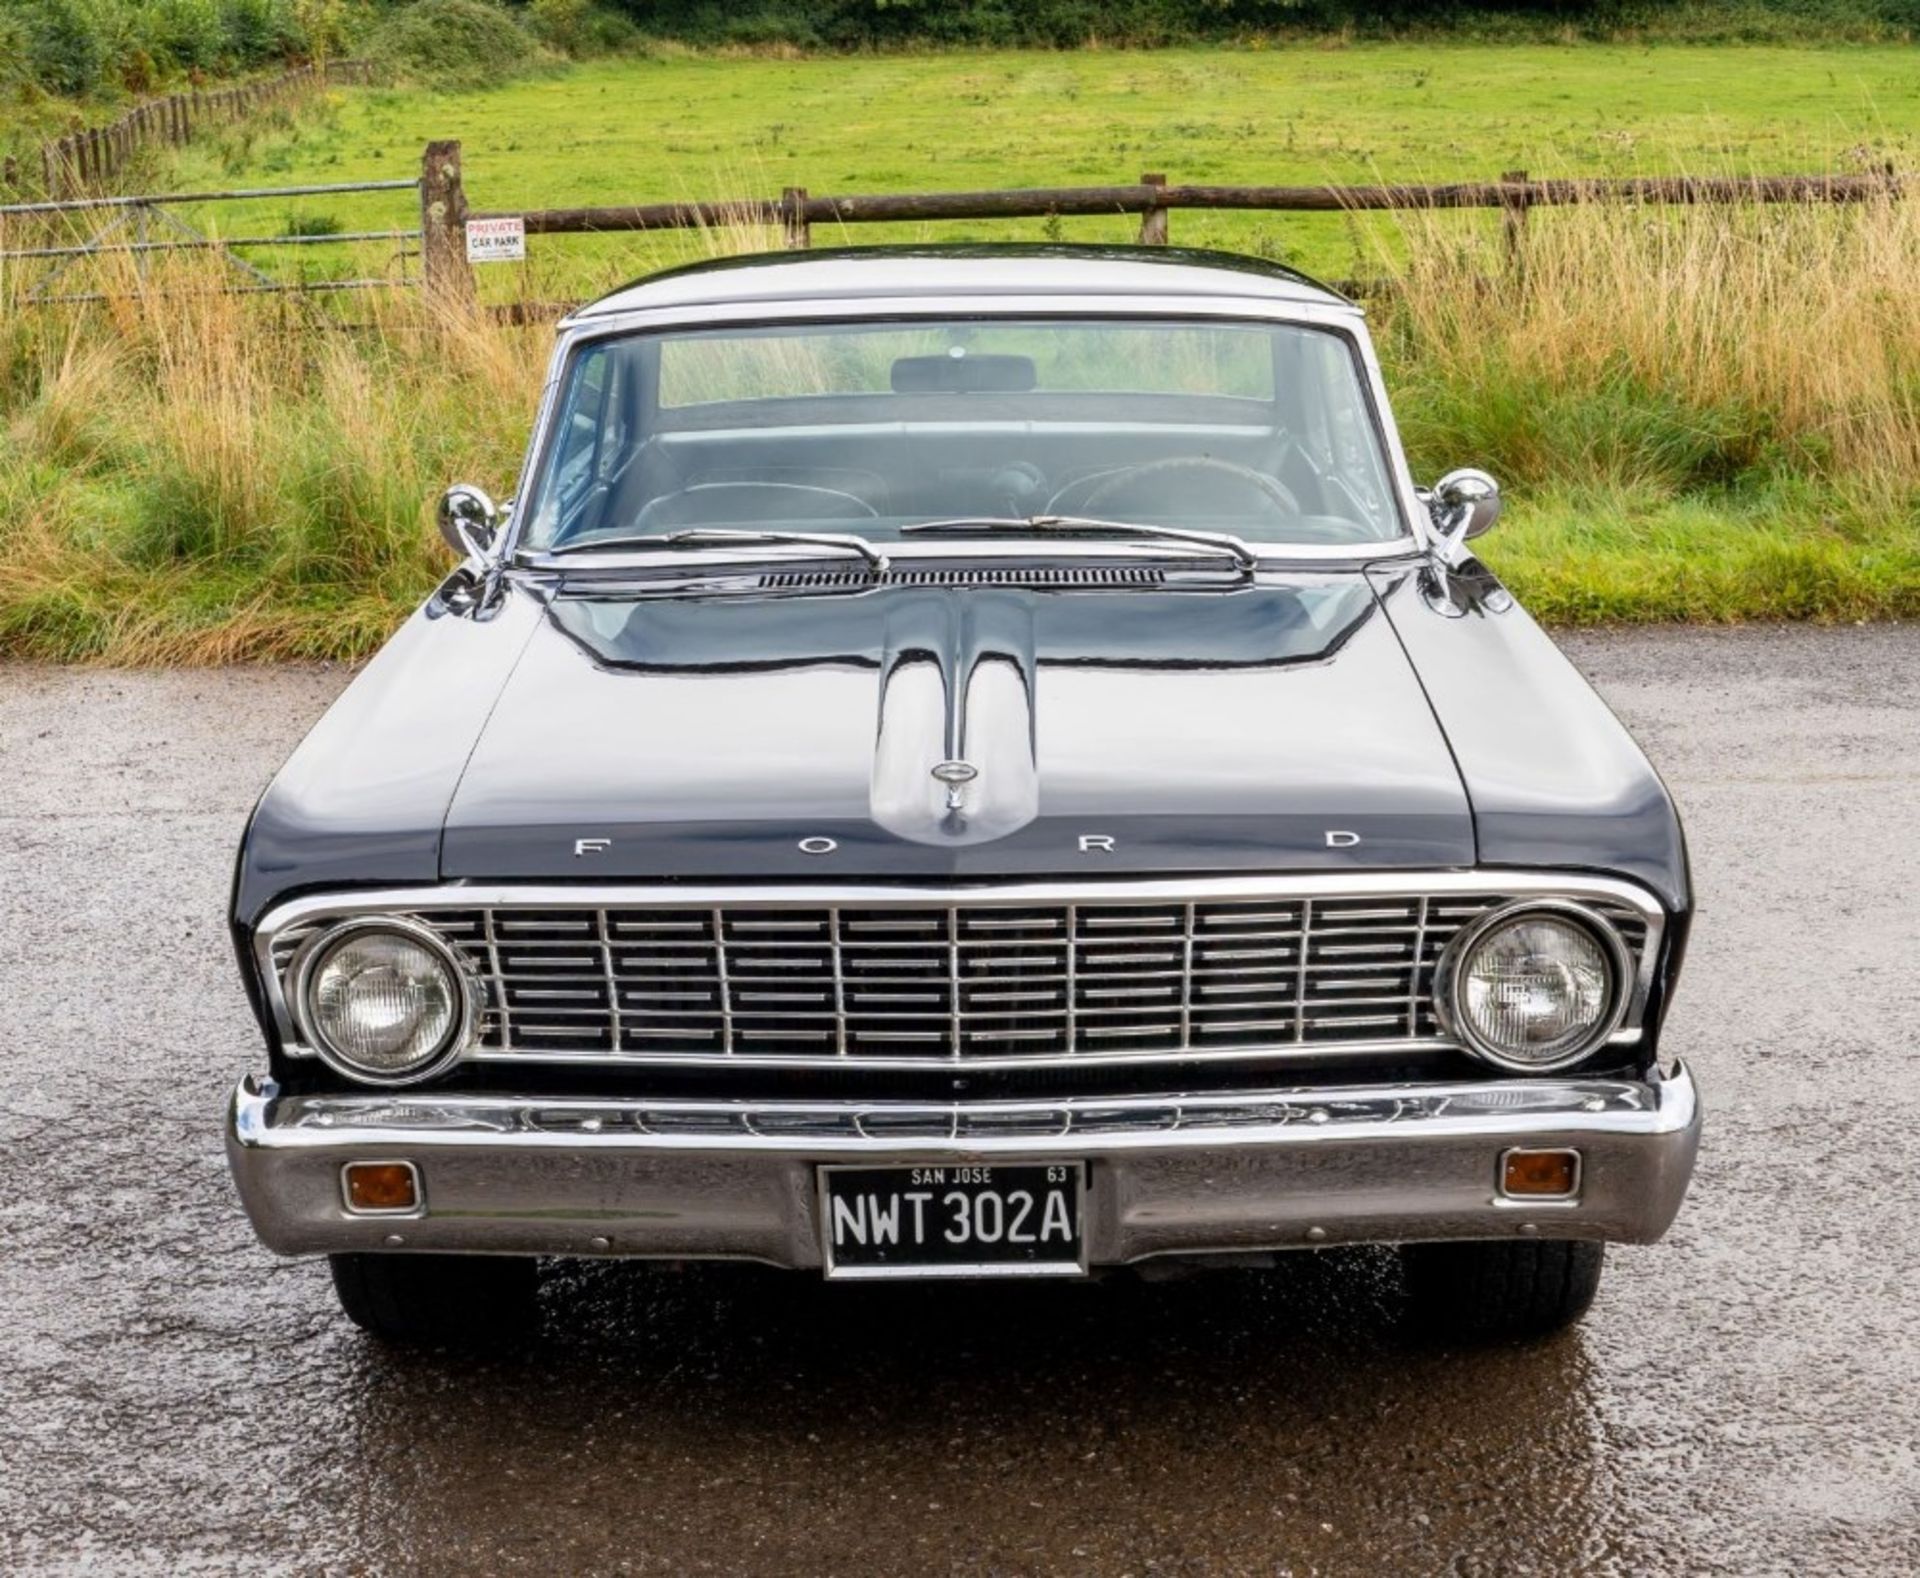 1964 FORD FALCON SPRINT Registration Number: NWT 302A Chassis Number: TBA Recorded Mileage: 41,500 - Image 6 of 16